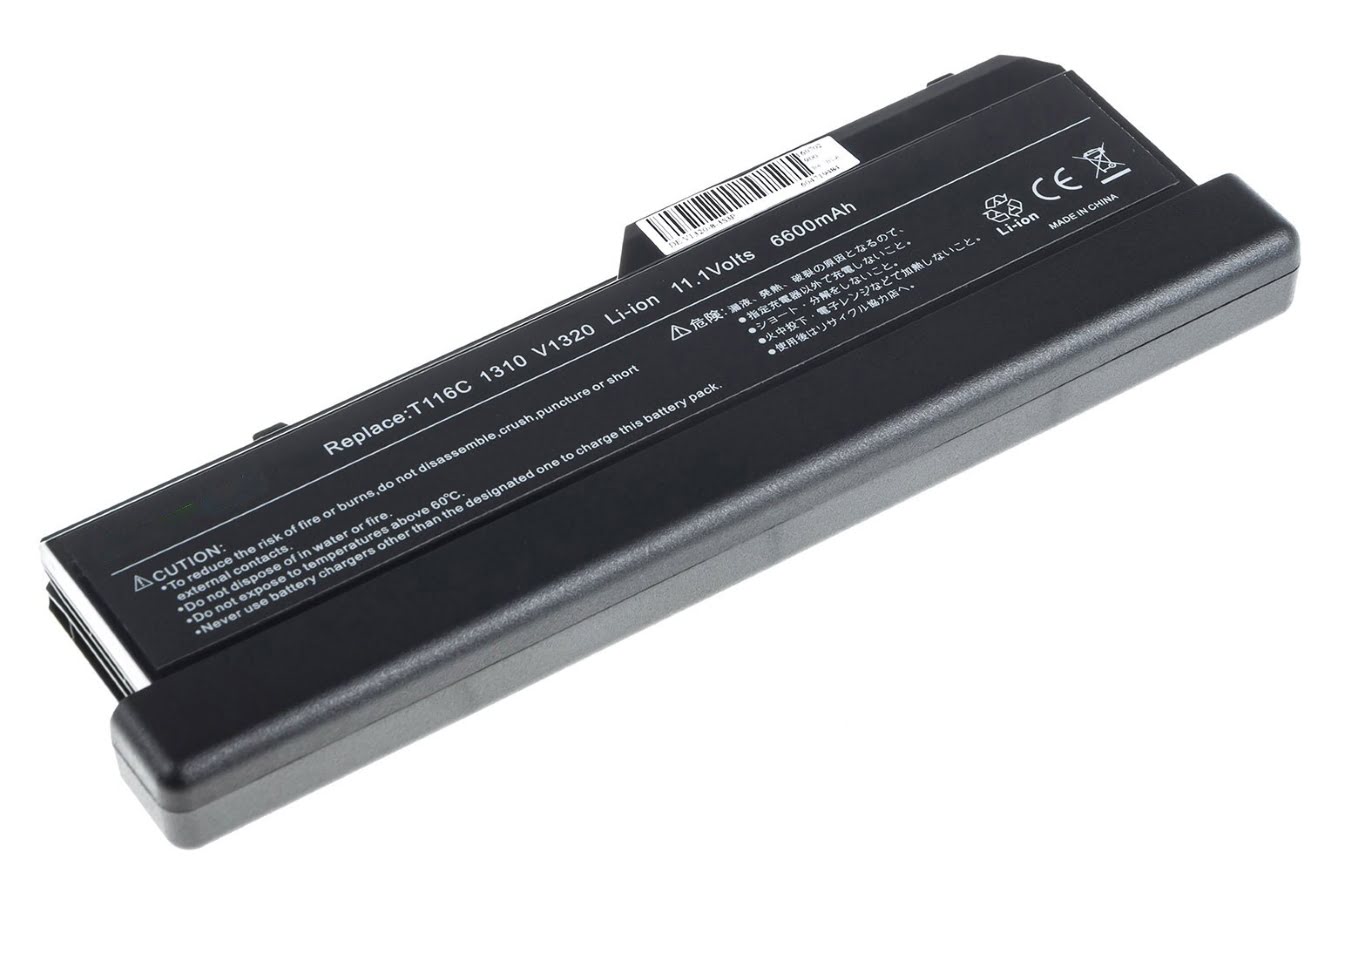 0K738H, 0N950C replacement Laptop Battery for Dell Vostro 1310, Vostro 1320, 9 cells, 11.1V, 6600mAh